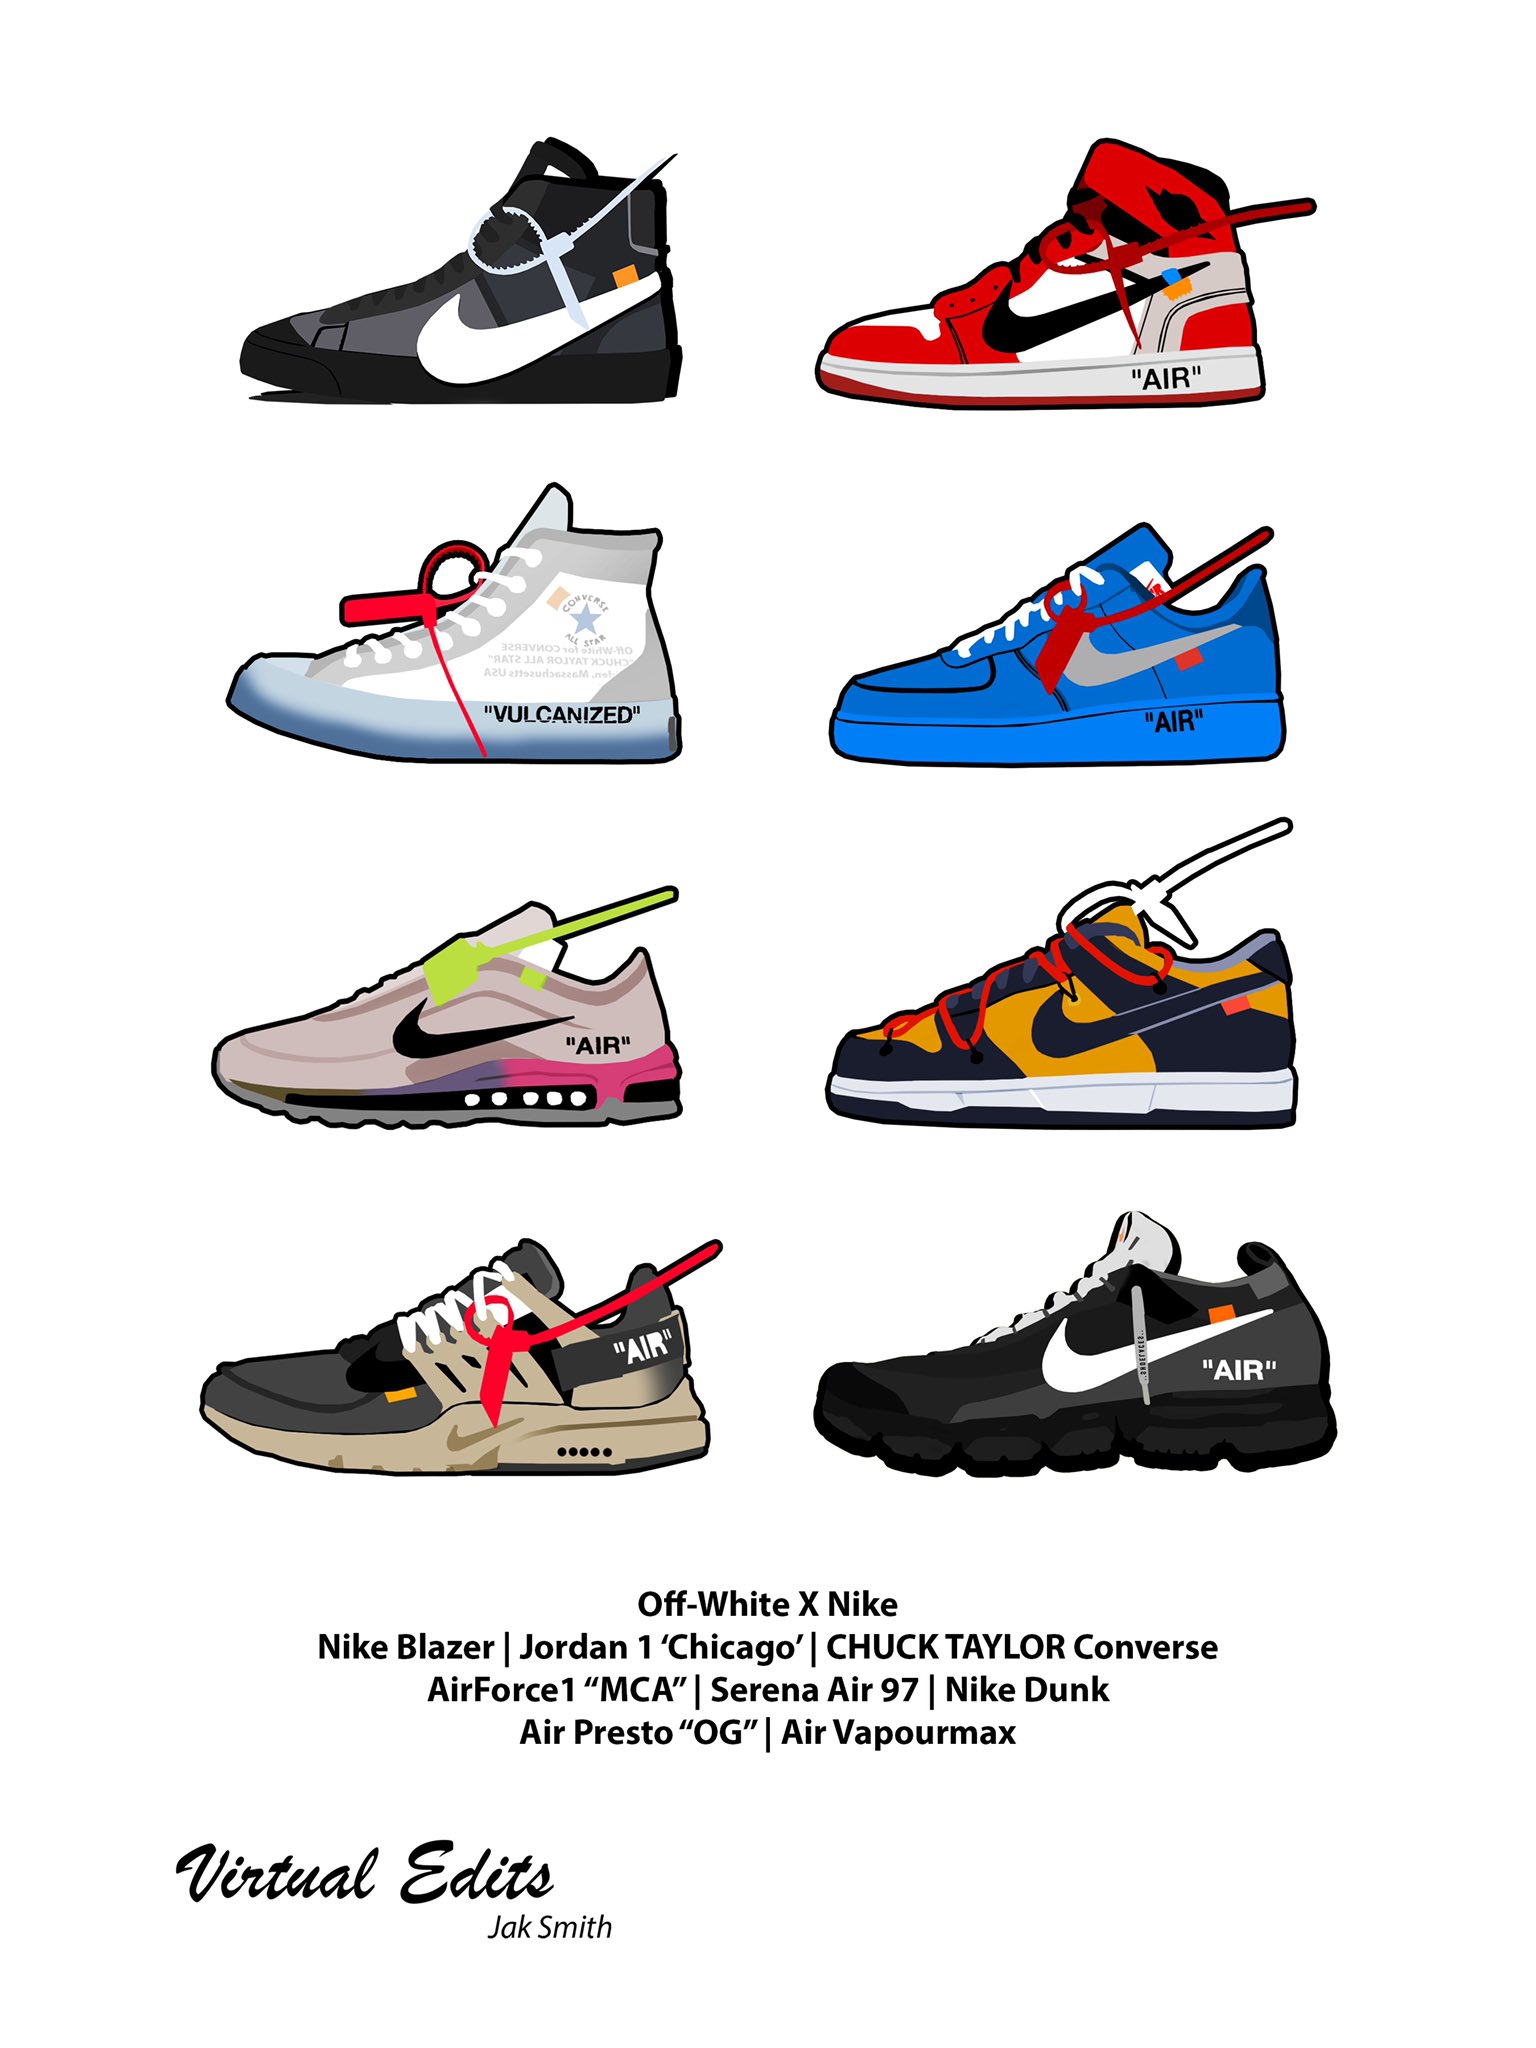 Asimilar descuento corte largo AllVirtualEdits on Twitter: "!NEW DESIGN! - Off-White X Nike collection  poster now available! With 8 of the best sneakers from this colab!  Available for purchase on poster print or canvas! Get in